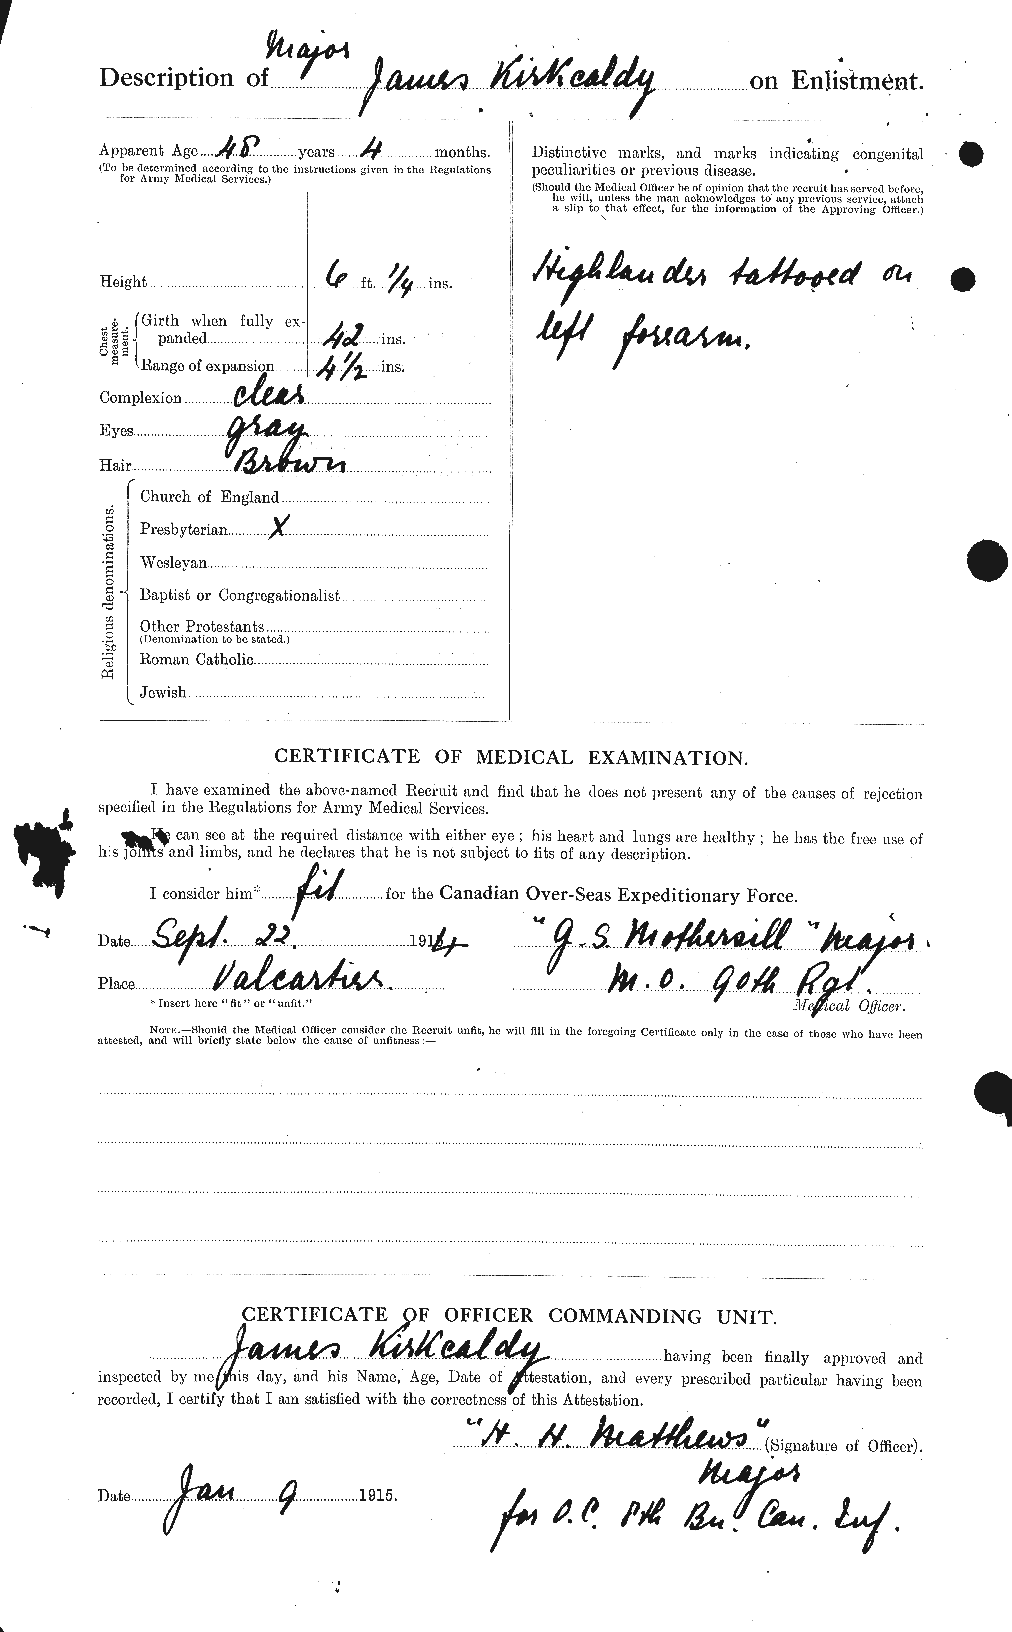 Personnel Records of the First World War - CEF 441001b